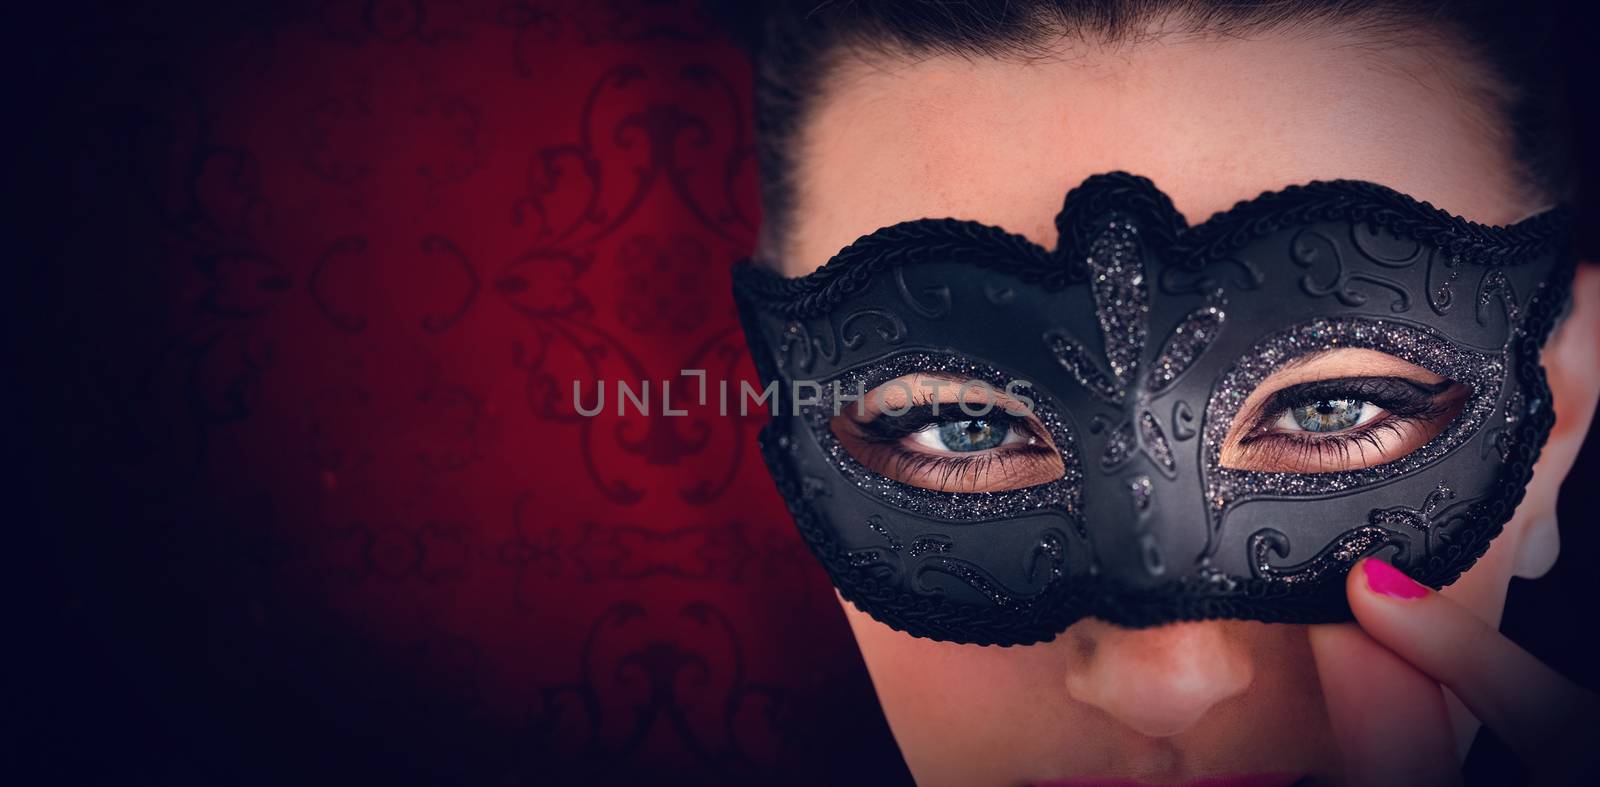 Elegant patterned wallpaper in red tones against portrait of woman wearing masquerade mask